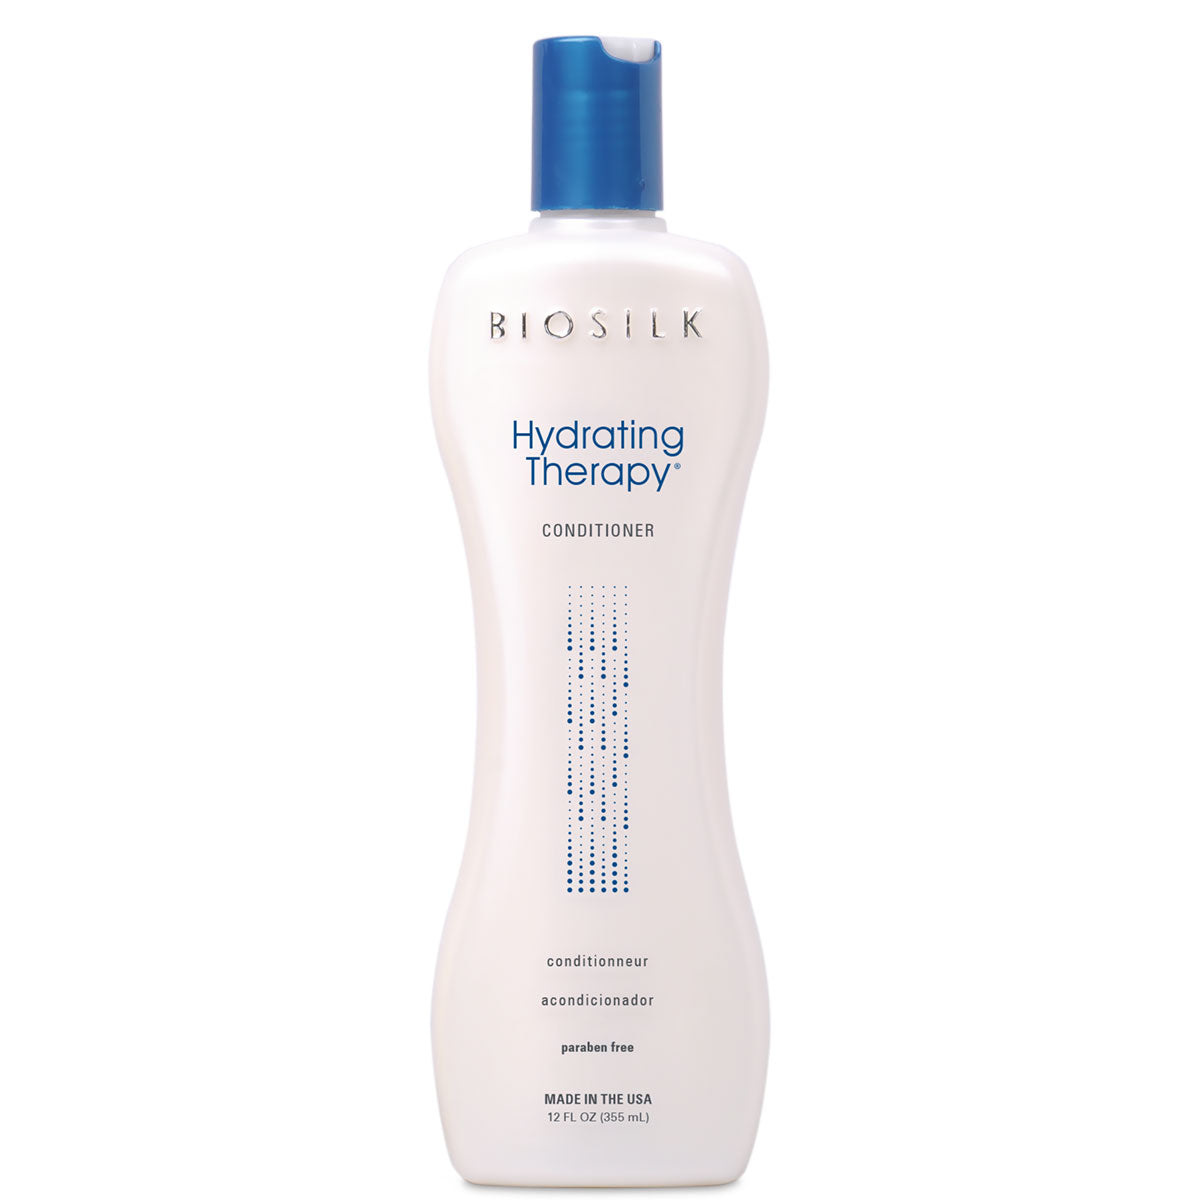 HYDRATING THERAPY Conditioner